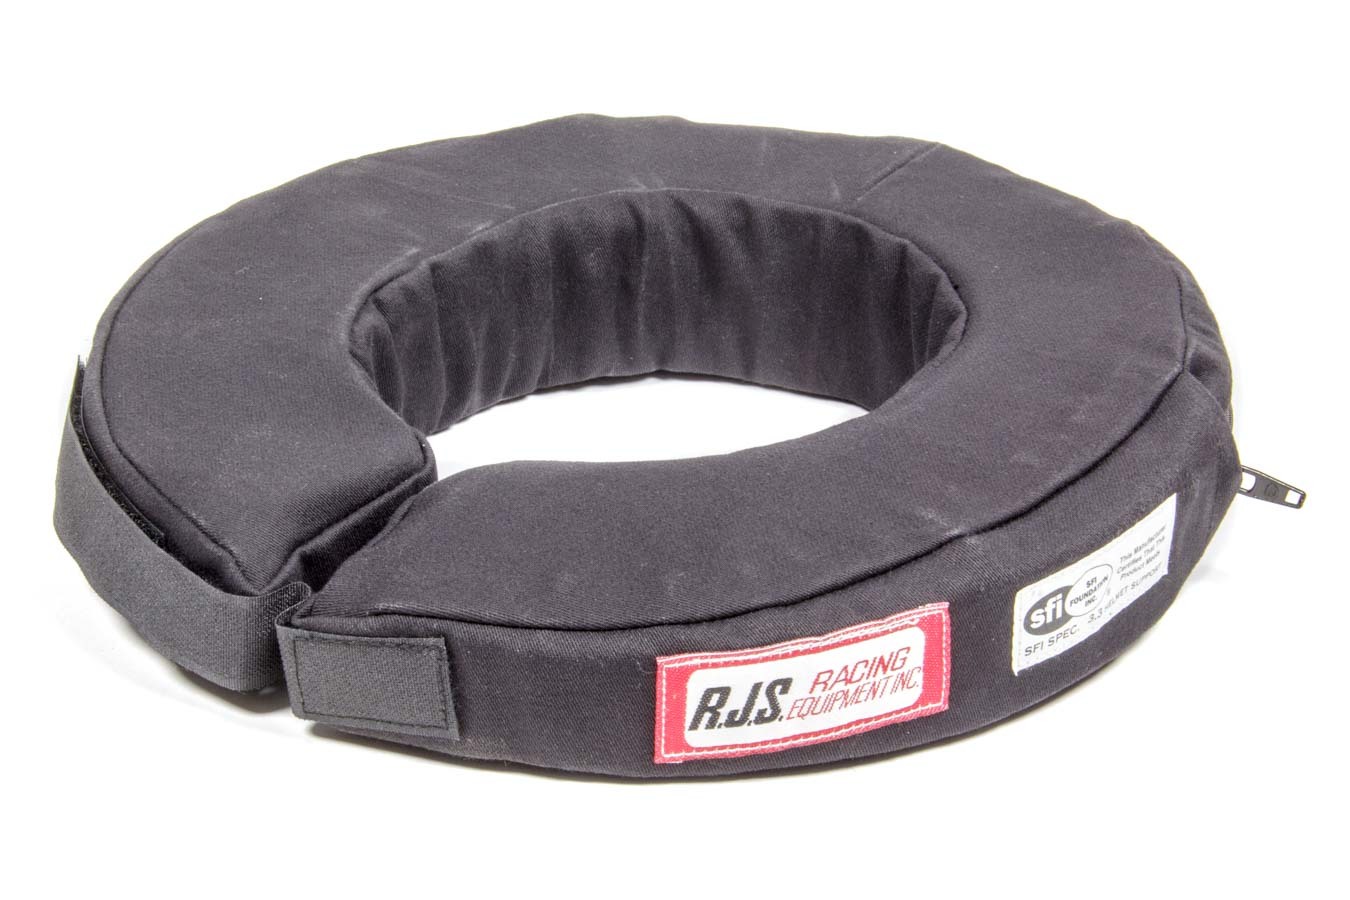 RJS Safety 11000401 Neck Support, 360 Degree, SFI 3.3, Padded, Fire Retardant Cotton, Black, Each